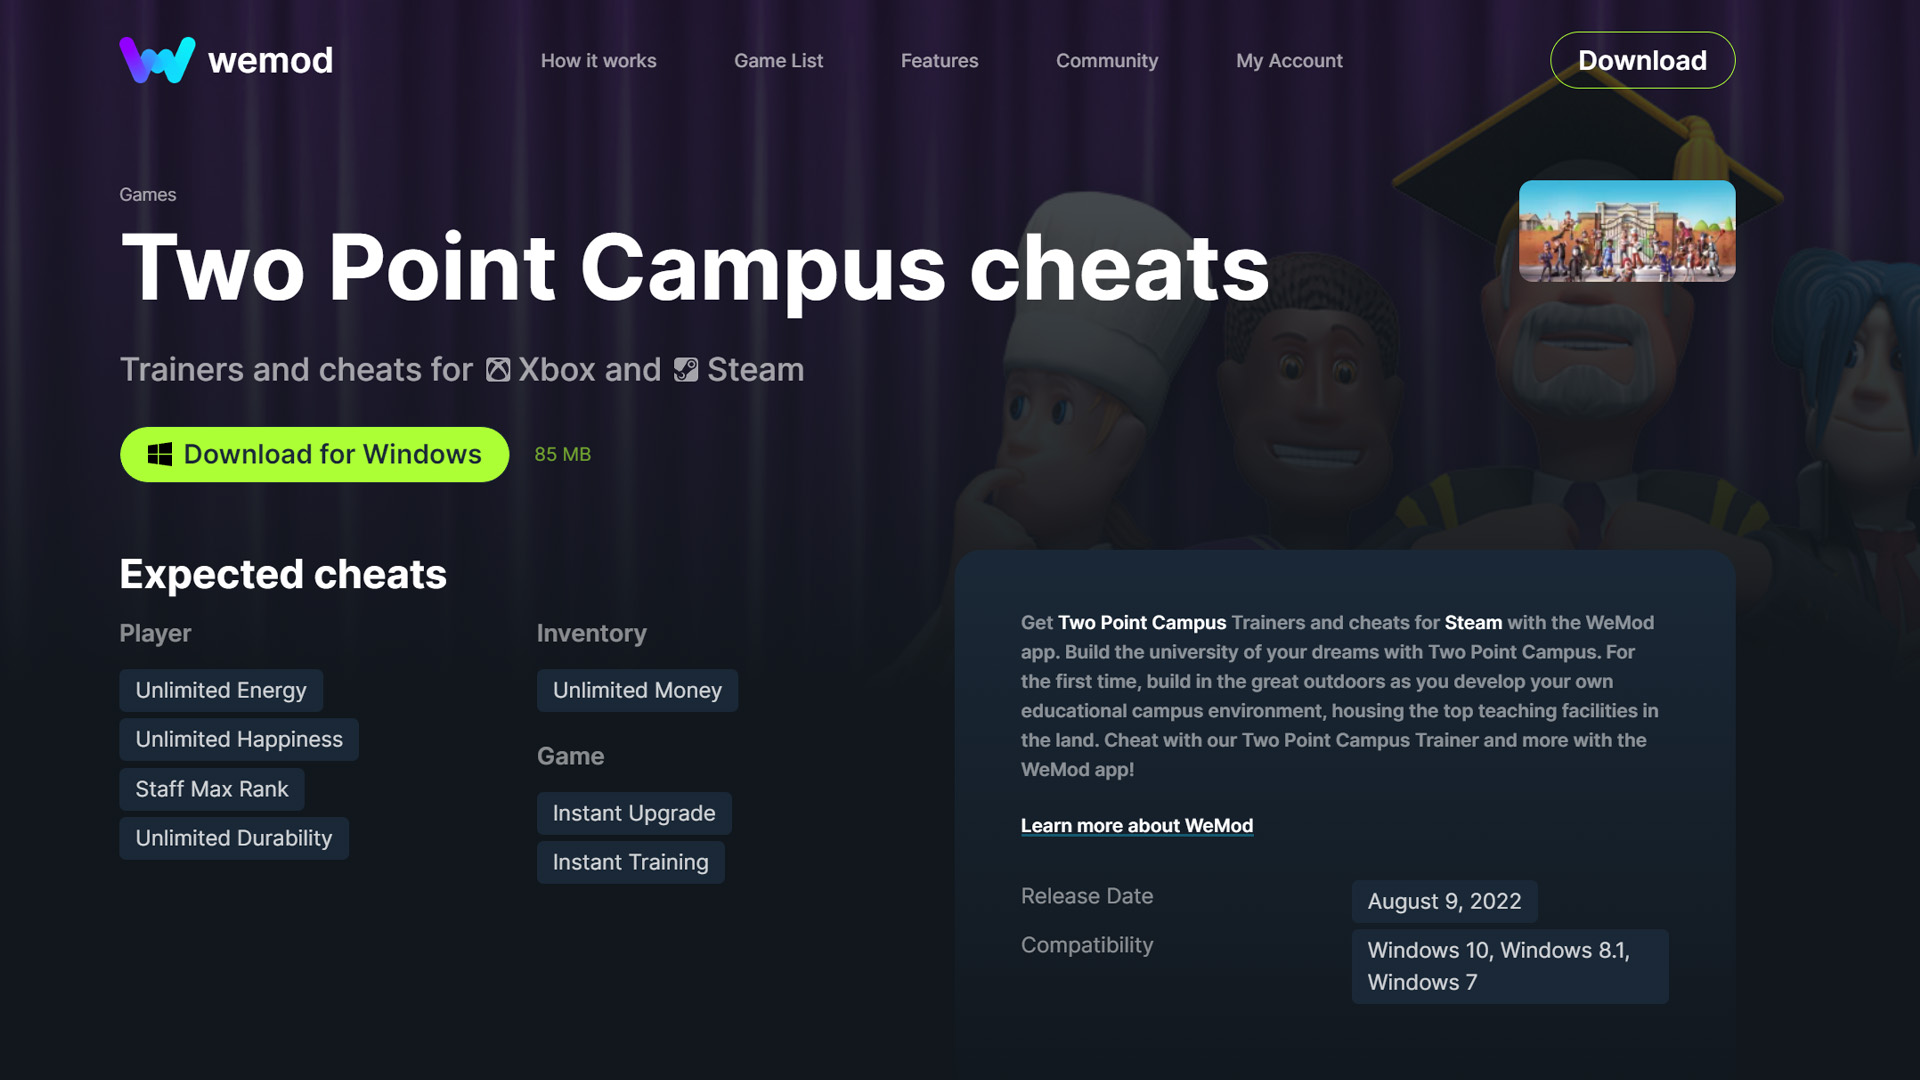 Two Point Campus cheats wemod page